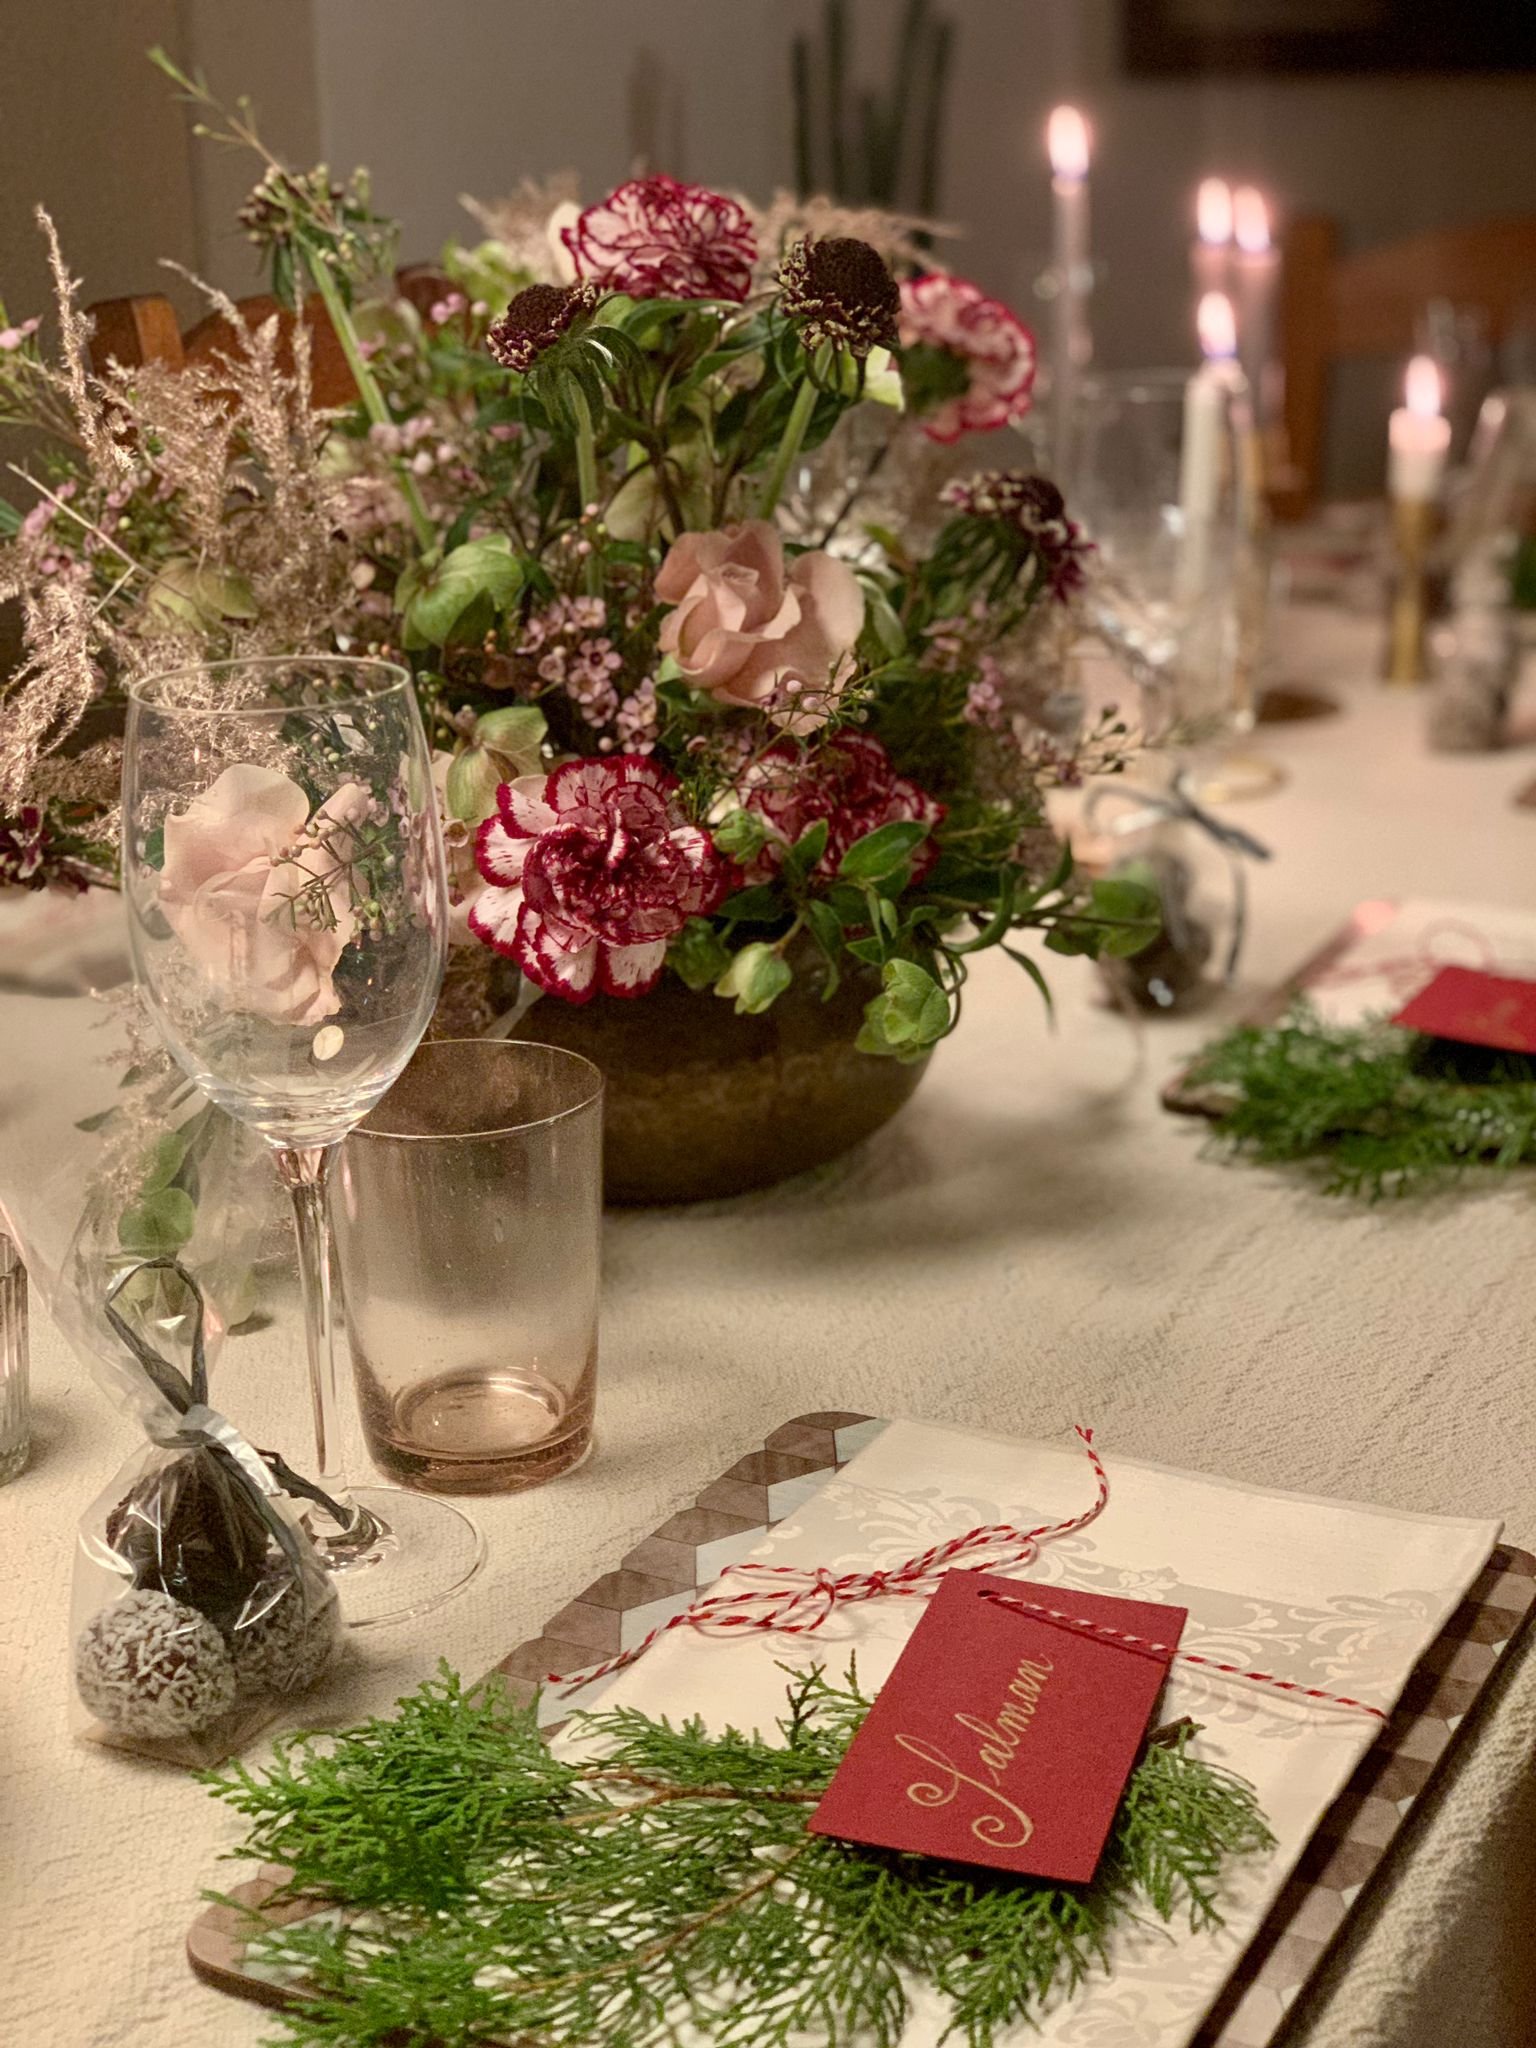 Tablescape Masterclass - Floral Workshop at West 16th 24.3.24